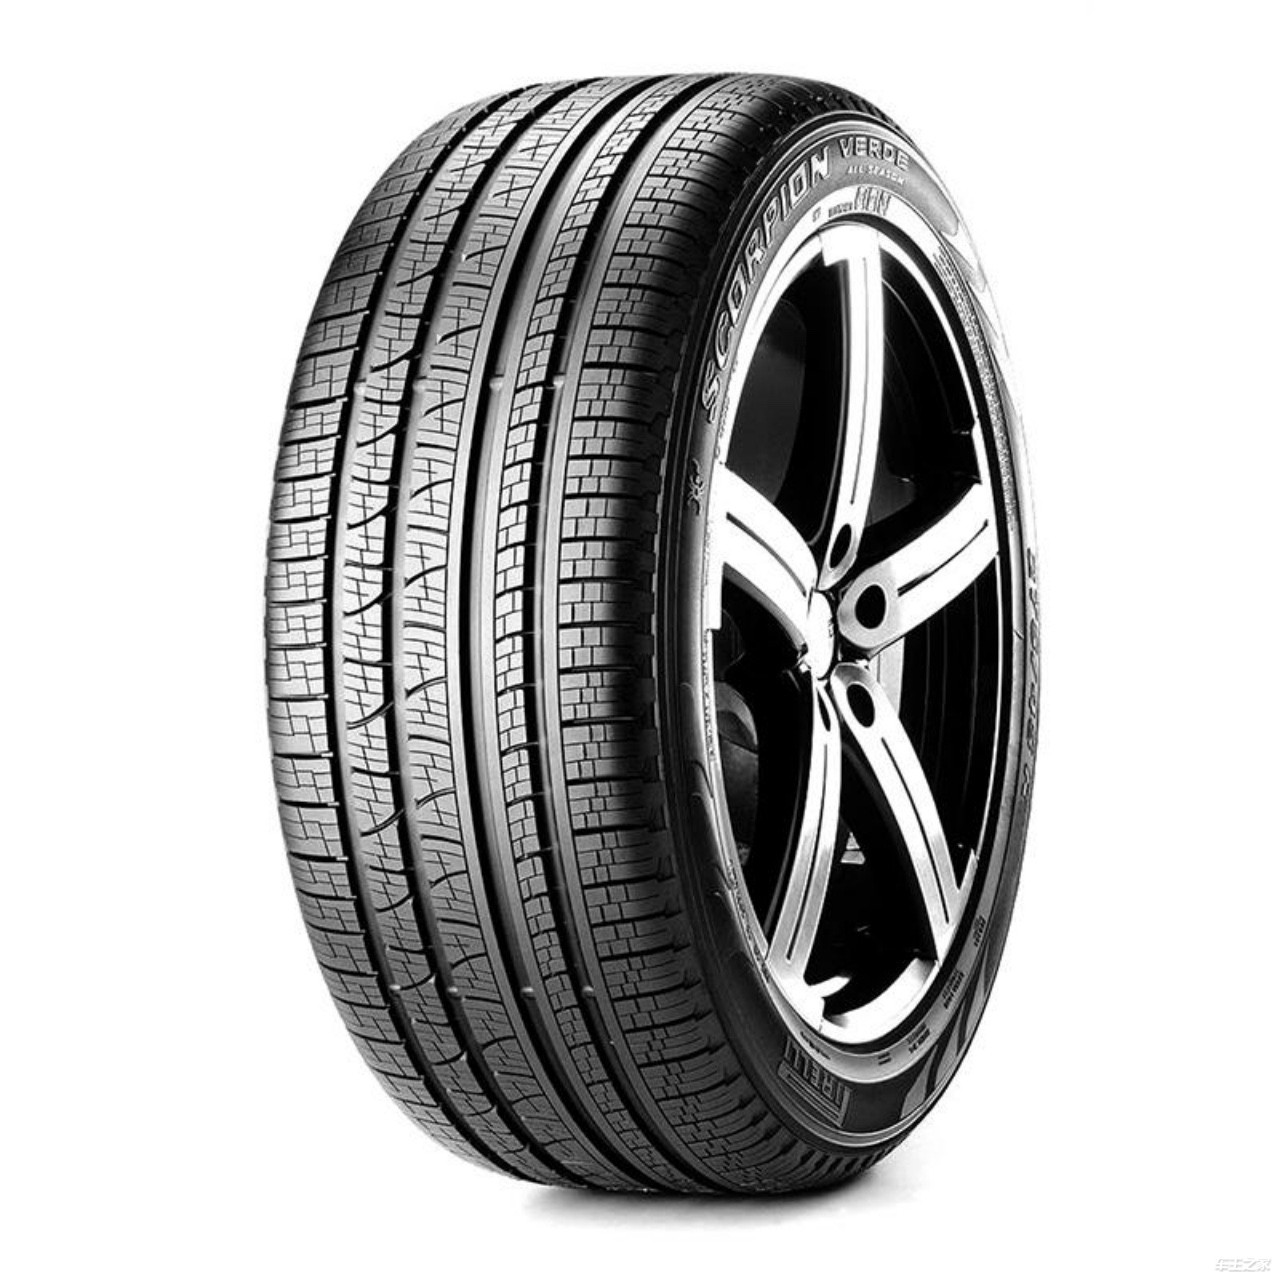 Do you choose tires? Do you really know your tires?